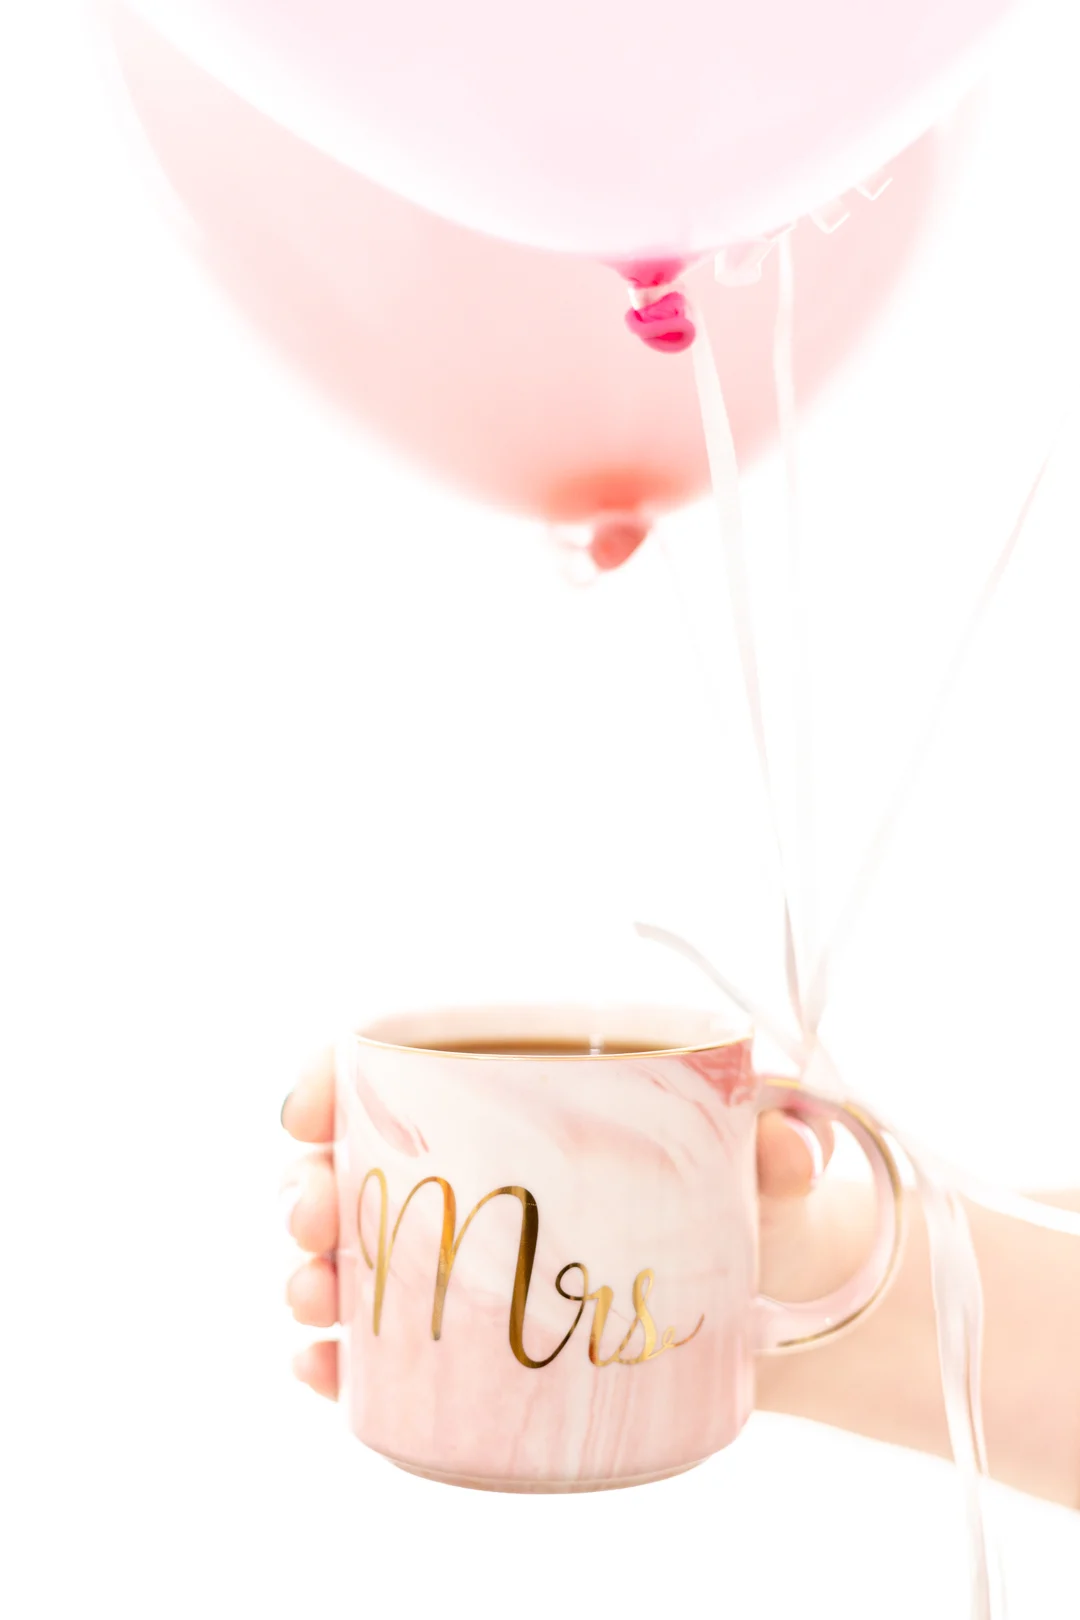 Mug of coffee with balloons tied to it for a surprise